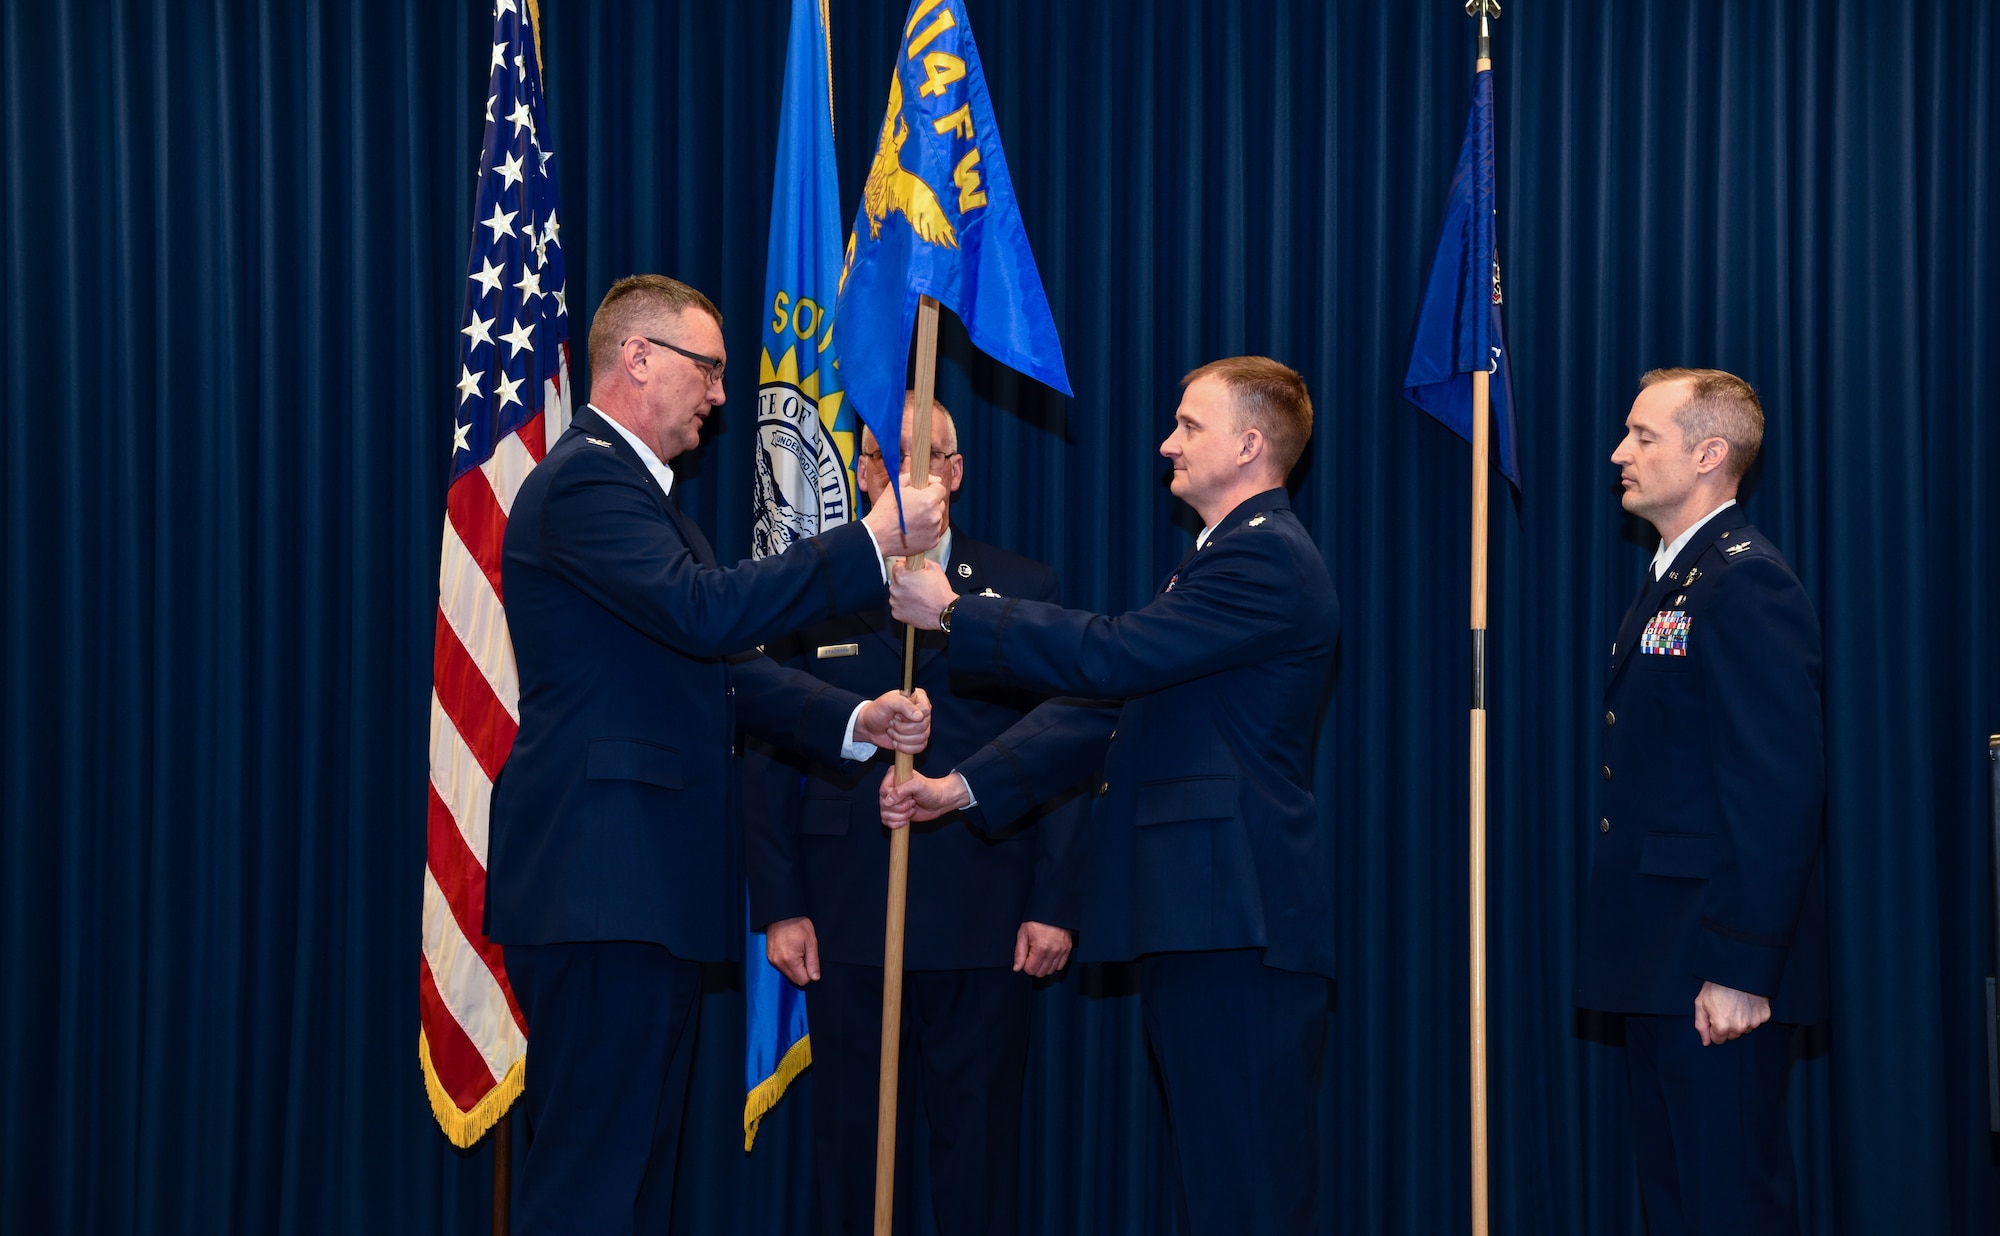 Lt. Col. Cory Kestel took command of the 114th Operations Group from Col. Mark Morrell who assumed the 114th Fighter Wing vice commander position during a Change of Command Ceremony at Joe Foss Field, S.D. March 2, 2019.